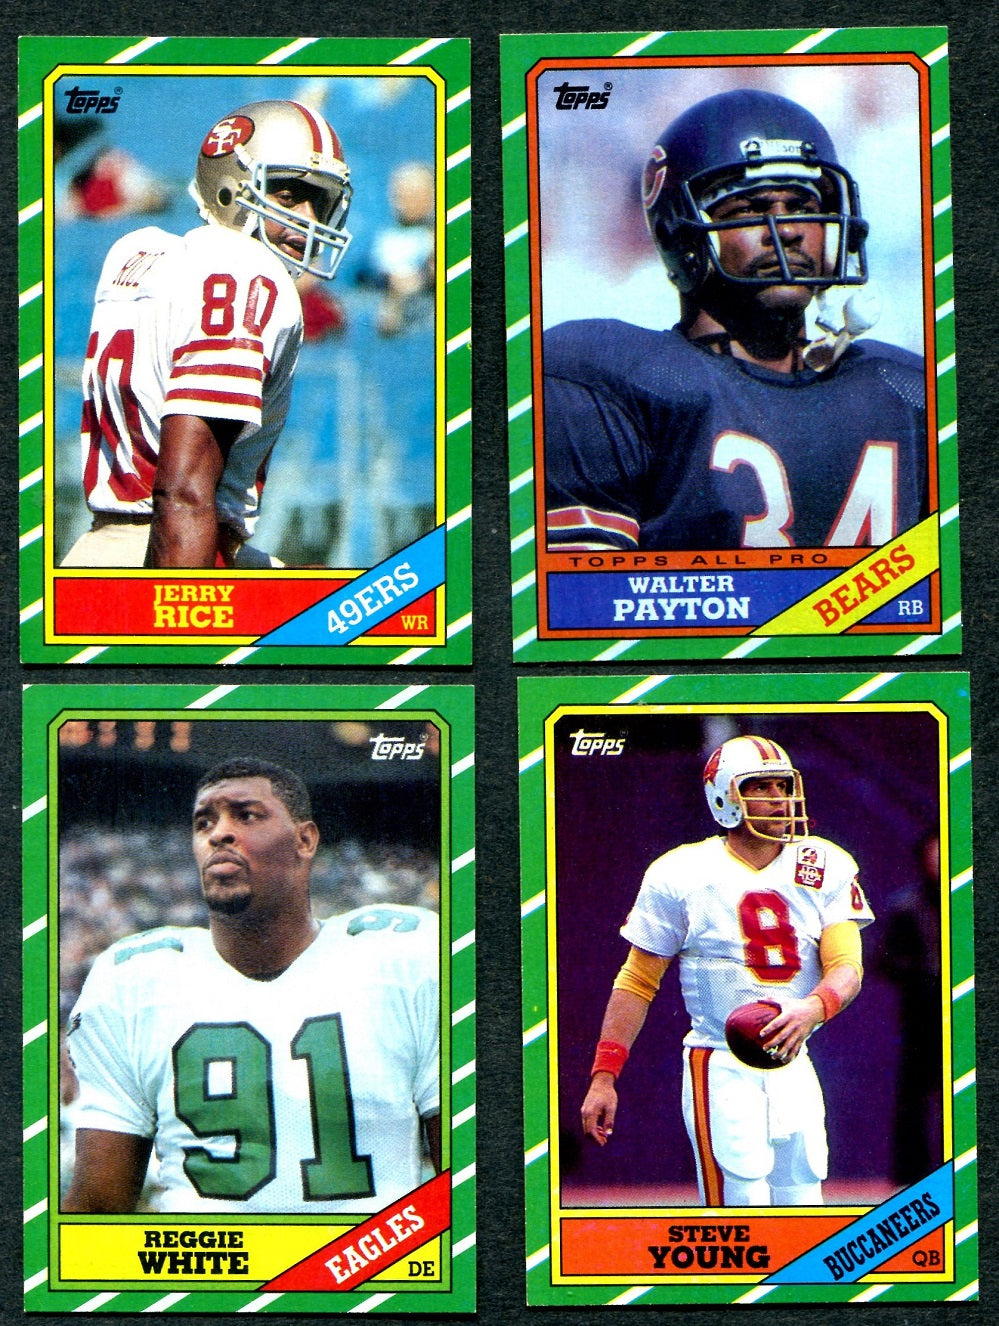 1986 Topps Football Complete Set NM (396) (24-487)